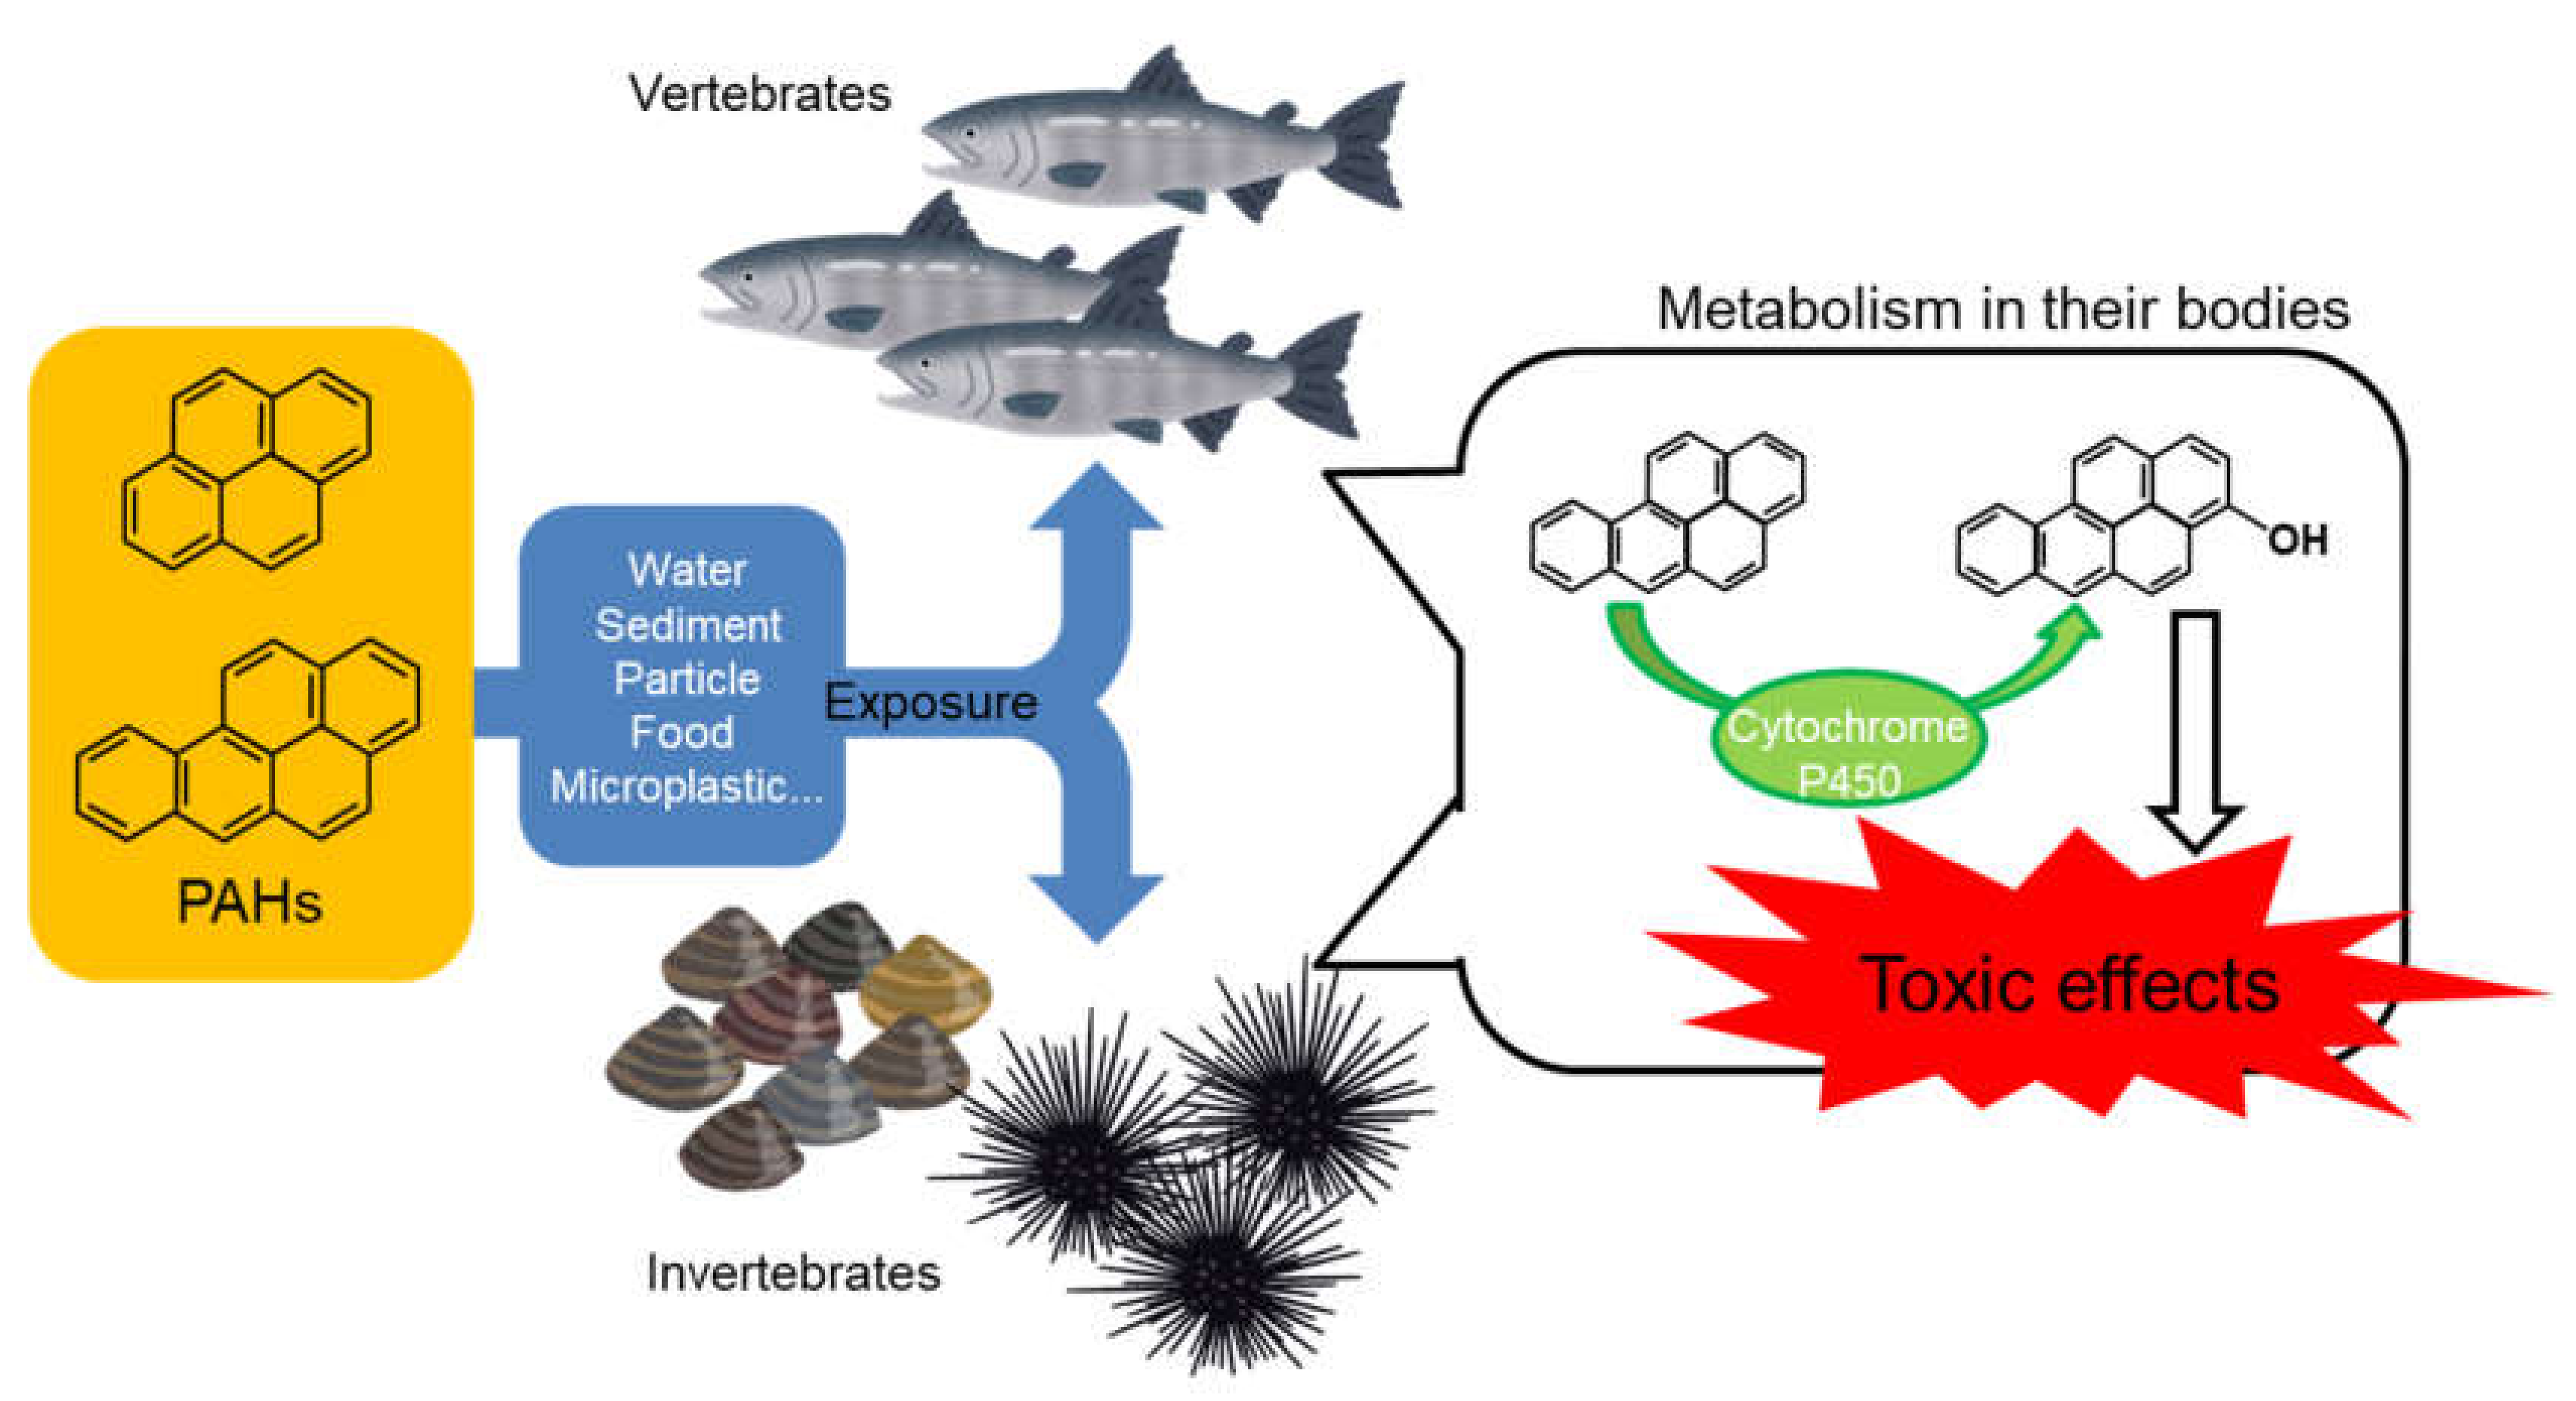 IJERPH | Free Full-Text | Toxicities of Polycyclic Aromatic Hydrocarbons  for Aquatic Animals